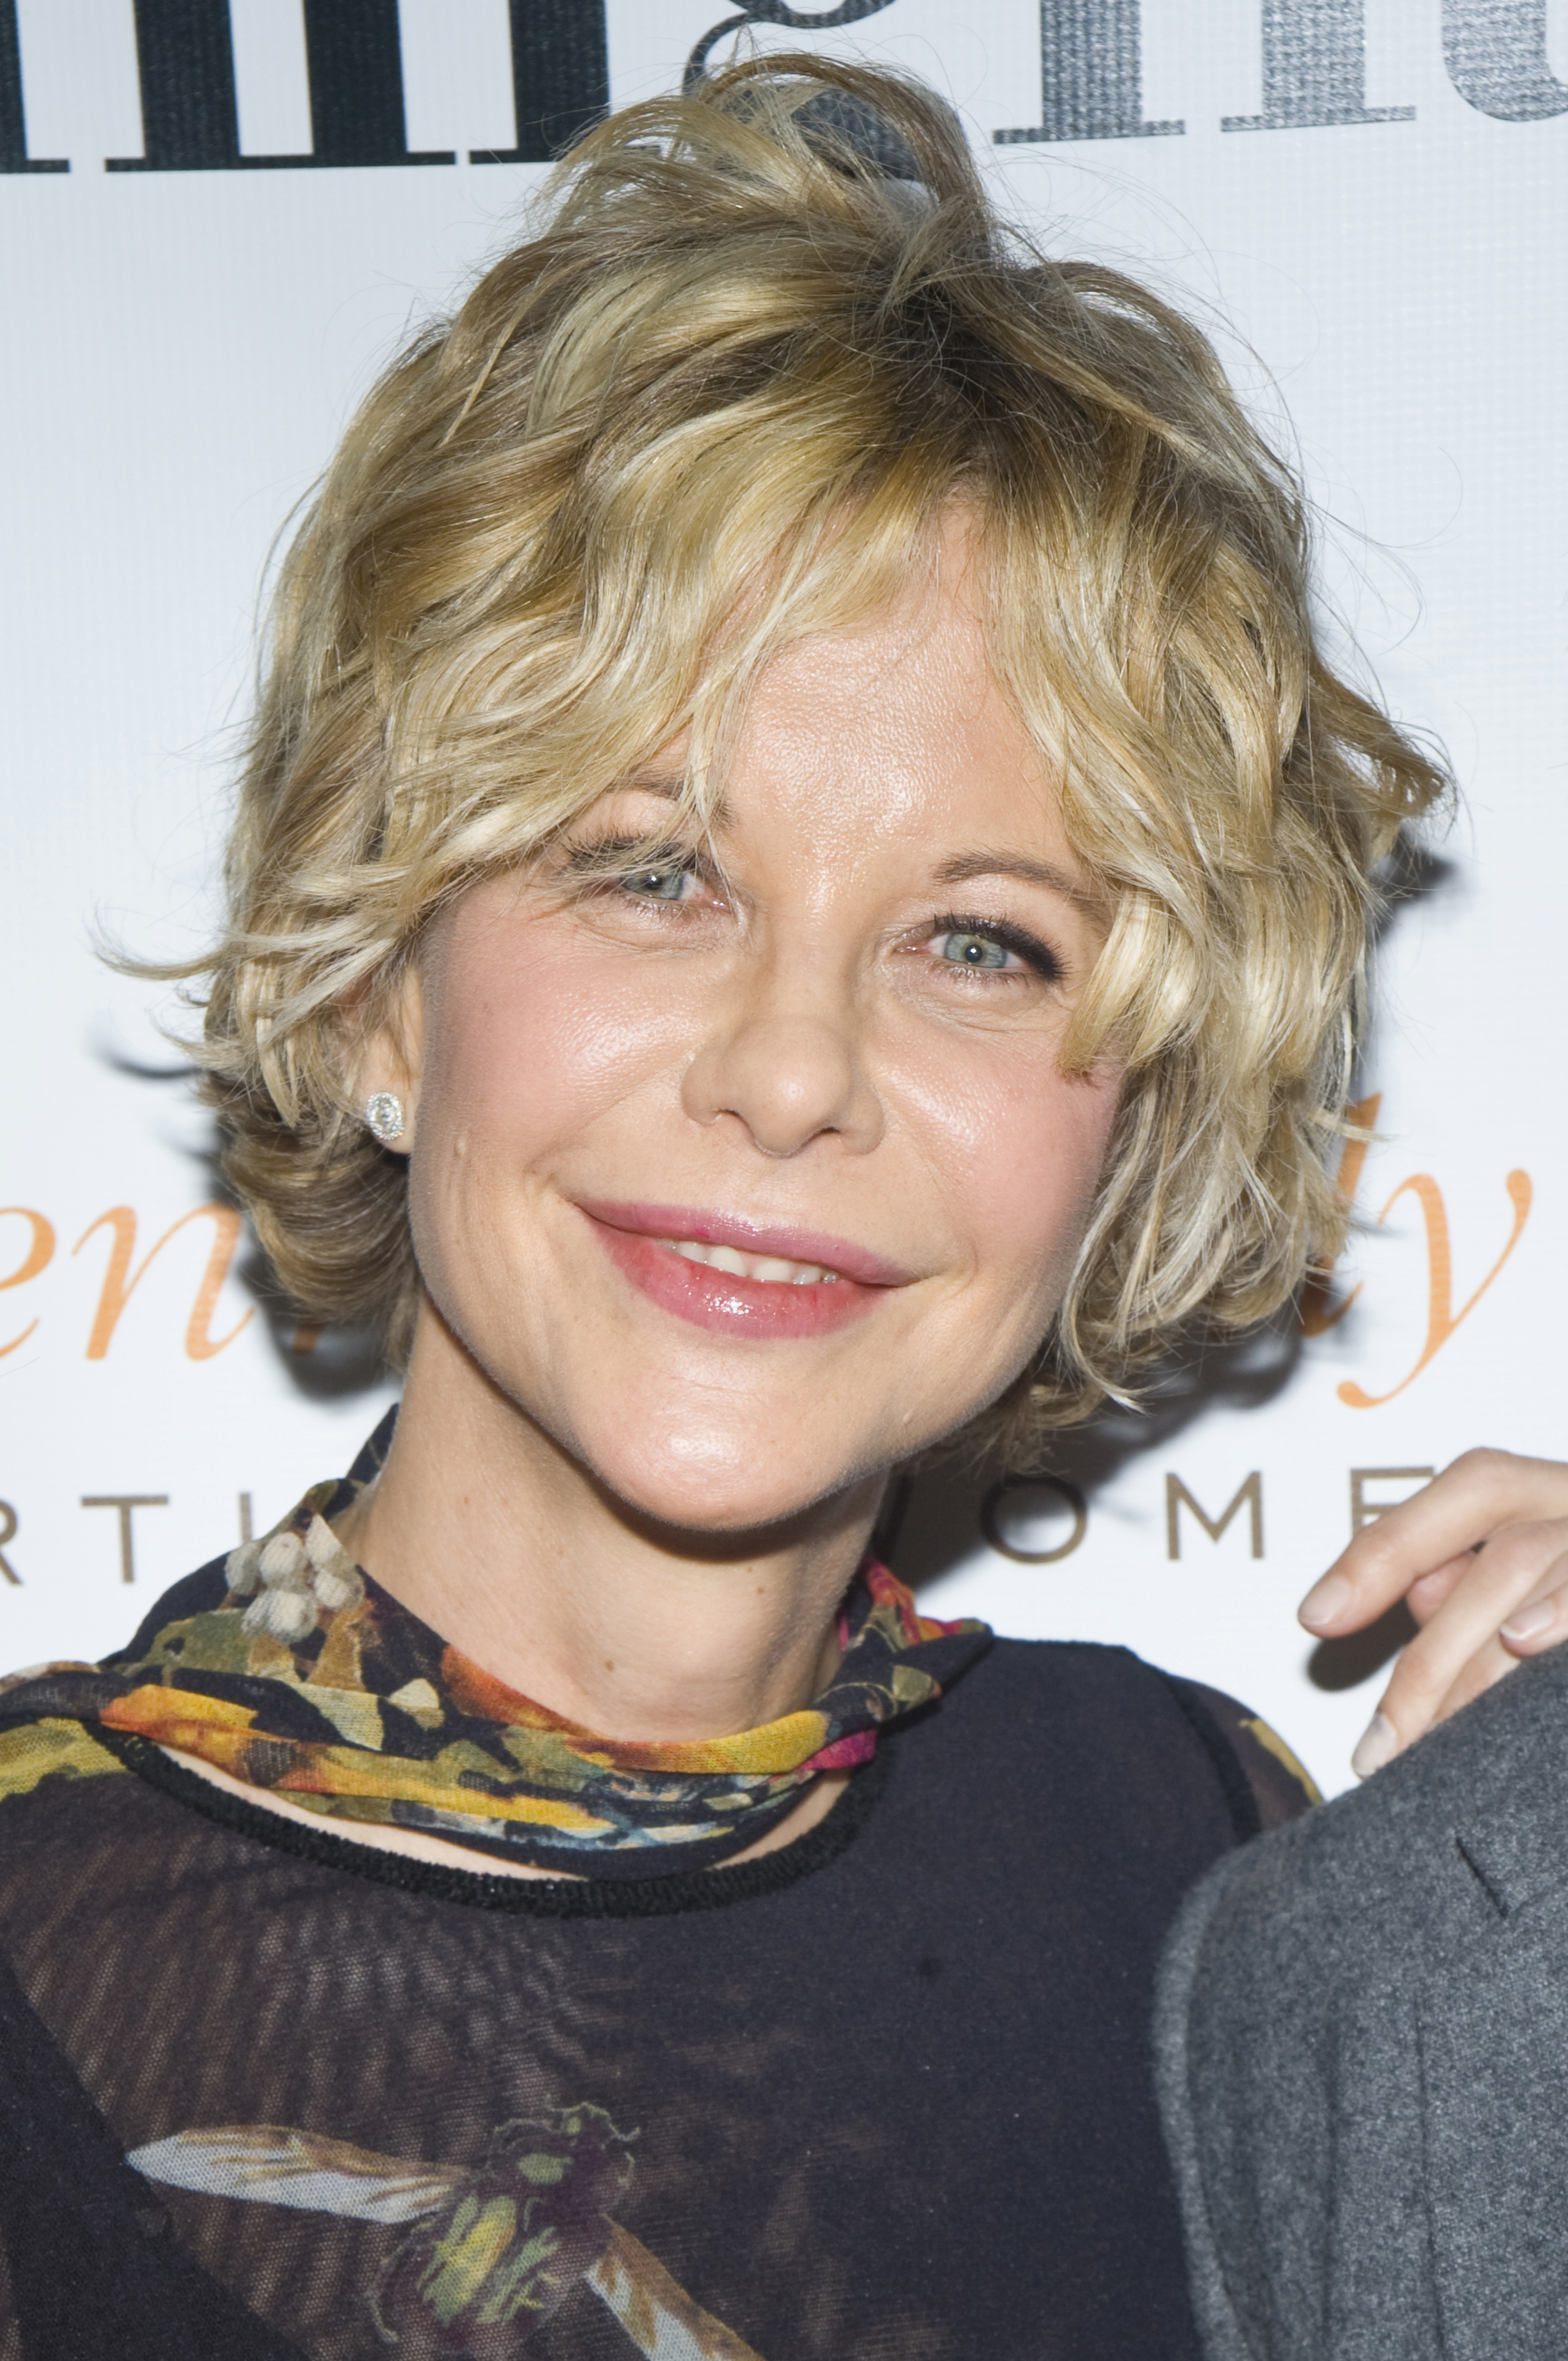 Meg Ryan attends the New York premiere of "Serious Moonlight," 2009 | Source: Getty Images